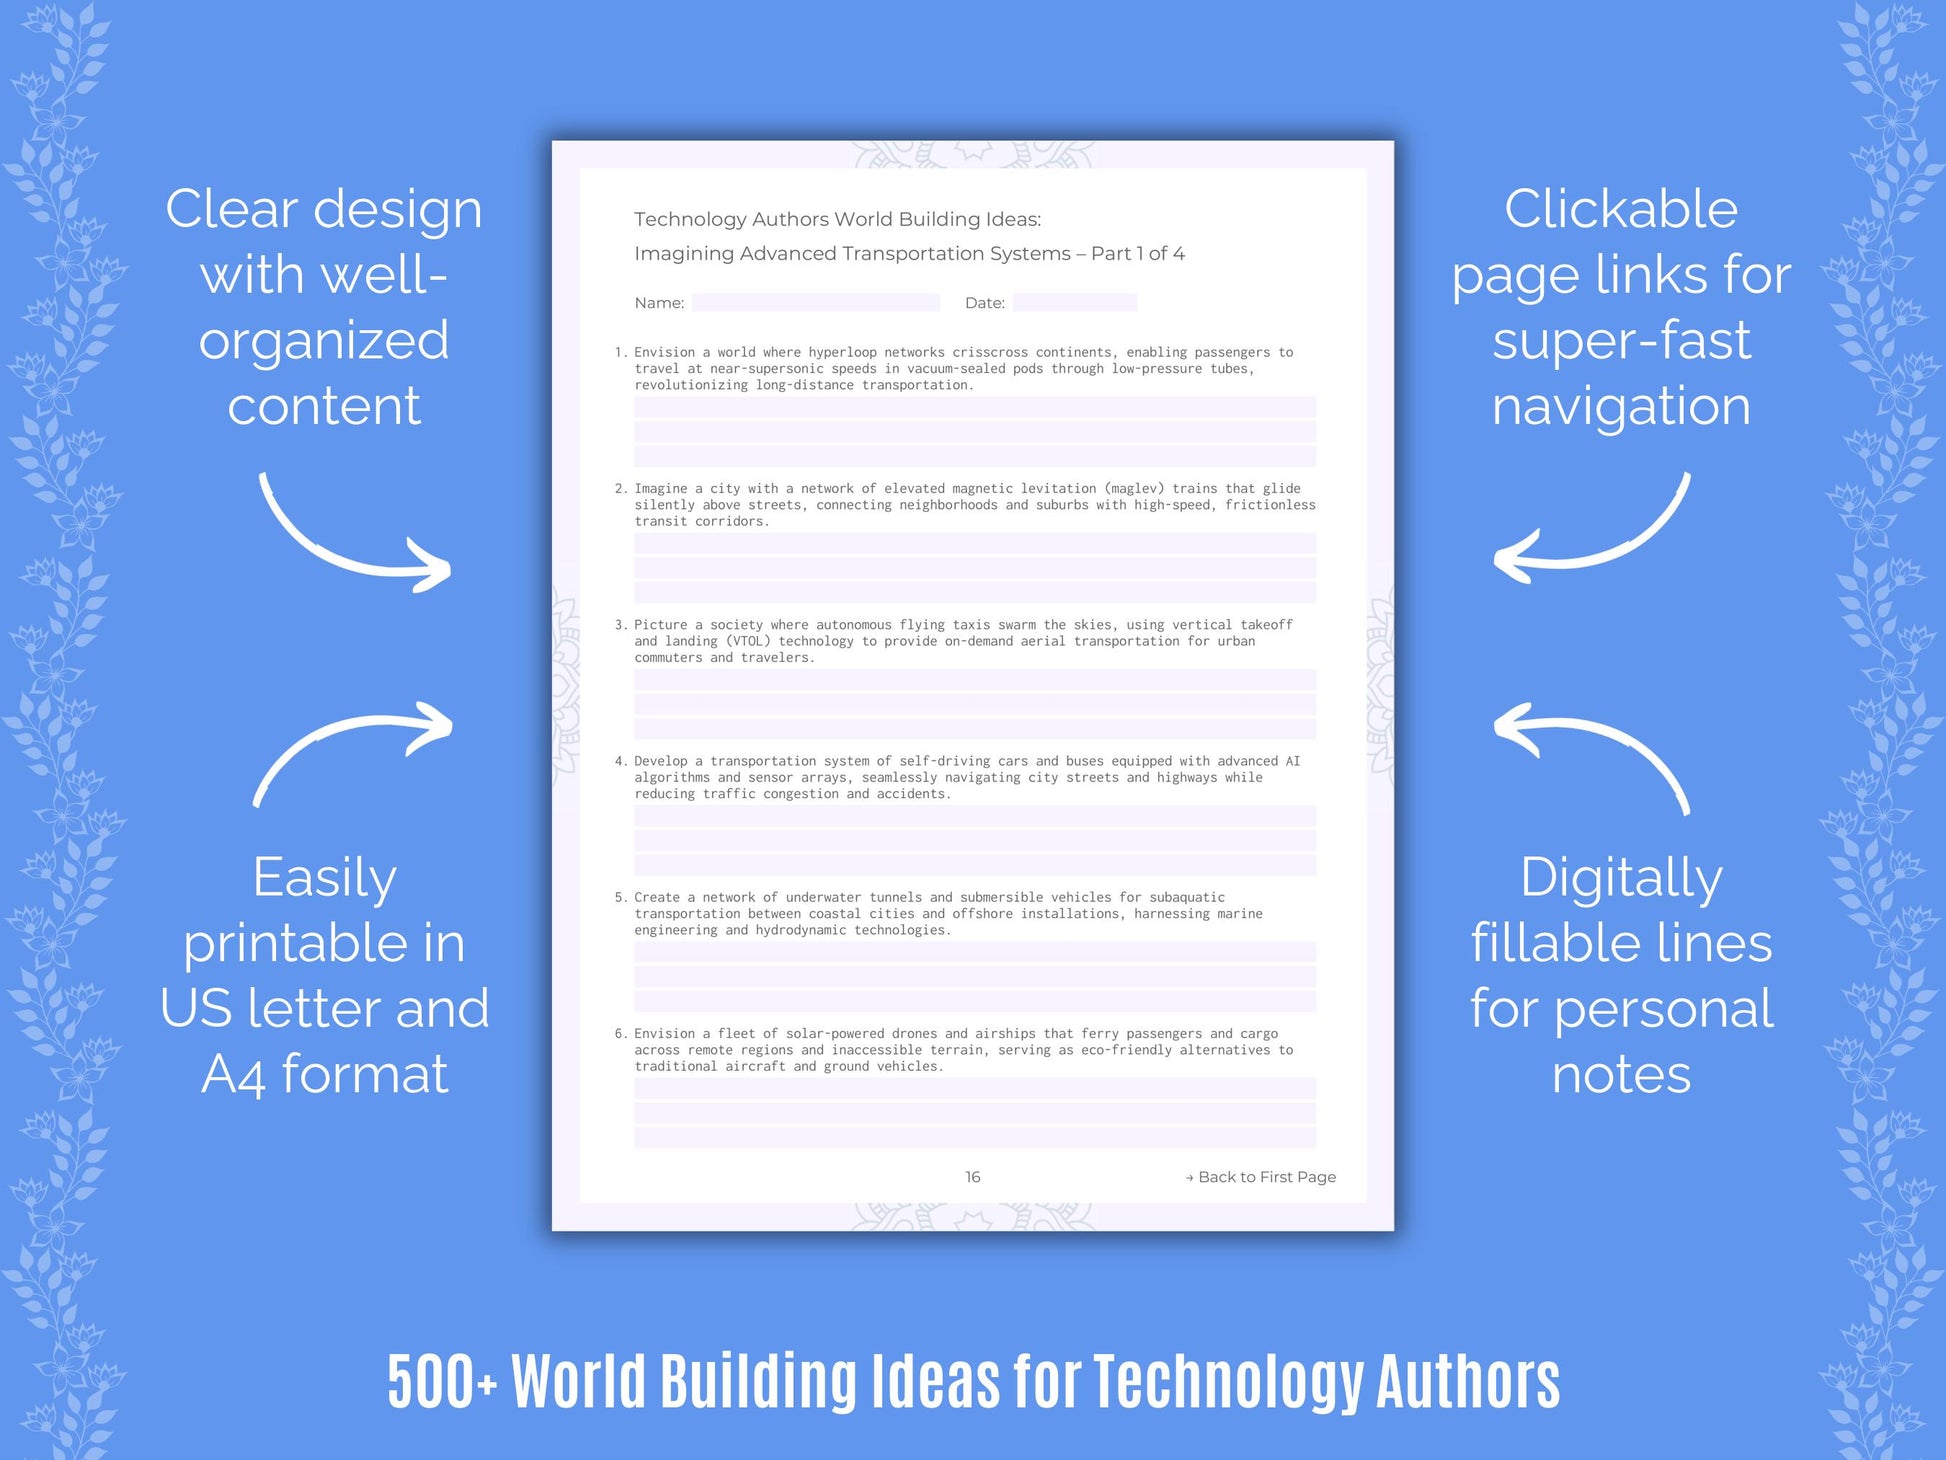 Technology Authors World Building Ideas Resource